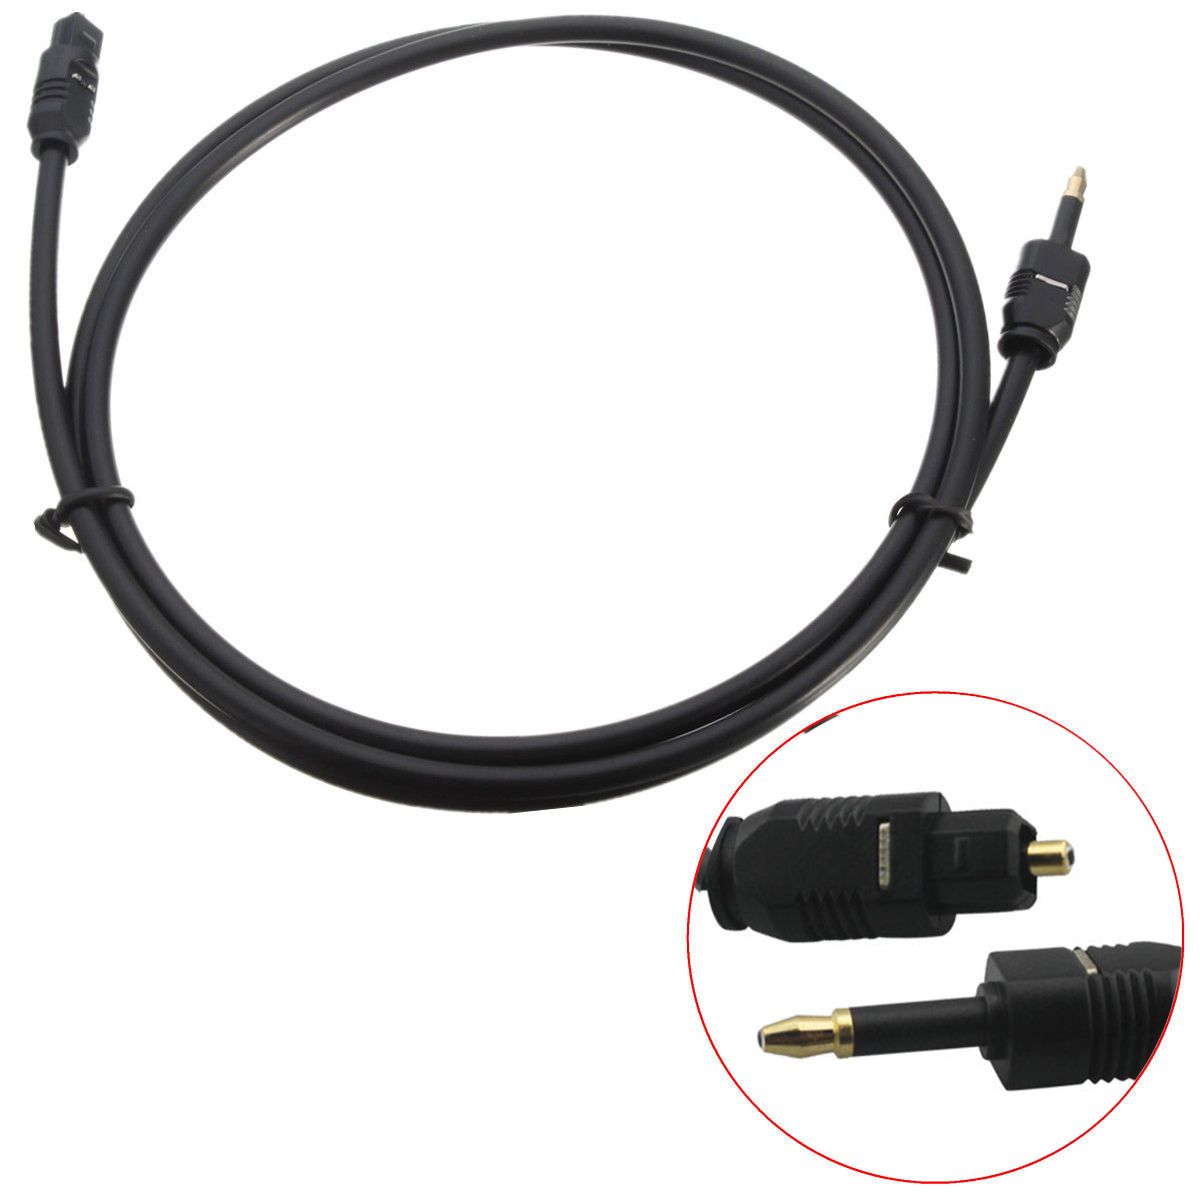 ❀SIMPLE❀ High quality 3.5mm Digital Wire Hot 1M/3FT SPDIF Audio Cable  Sale New Useful Practical Optical